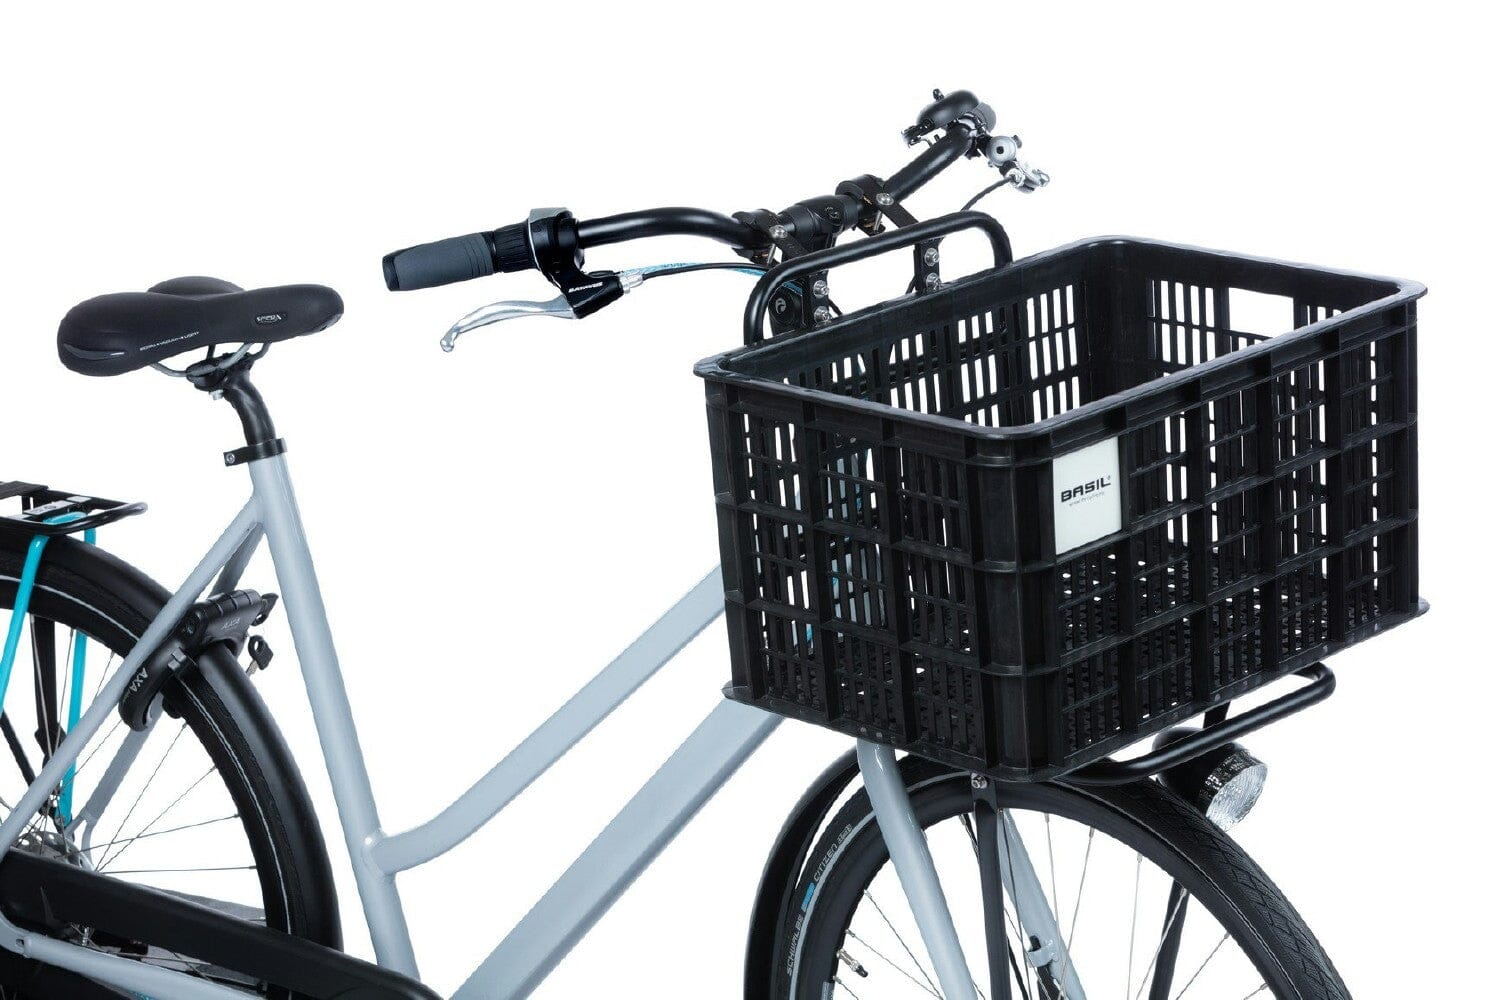 Basil Crate MIK Recycled - L 40L Black BASKETS Melbourne Powered Electric Bikes 